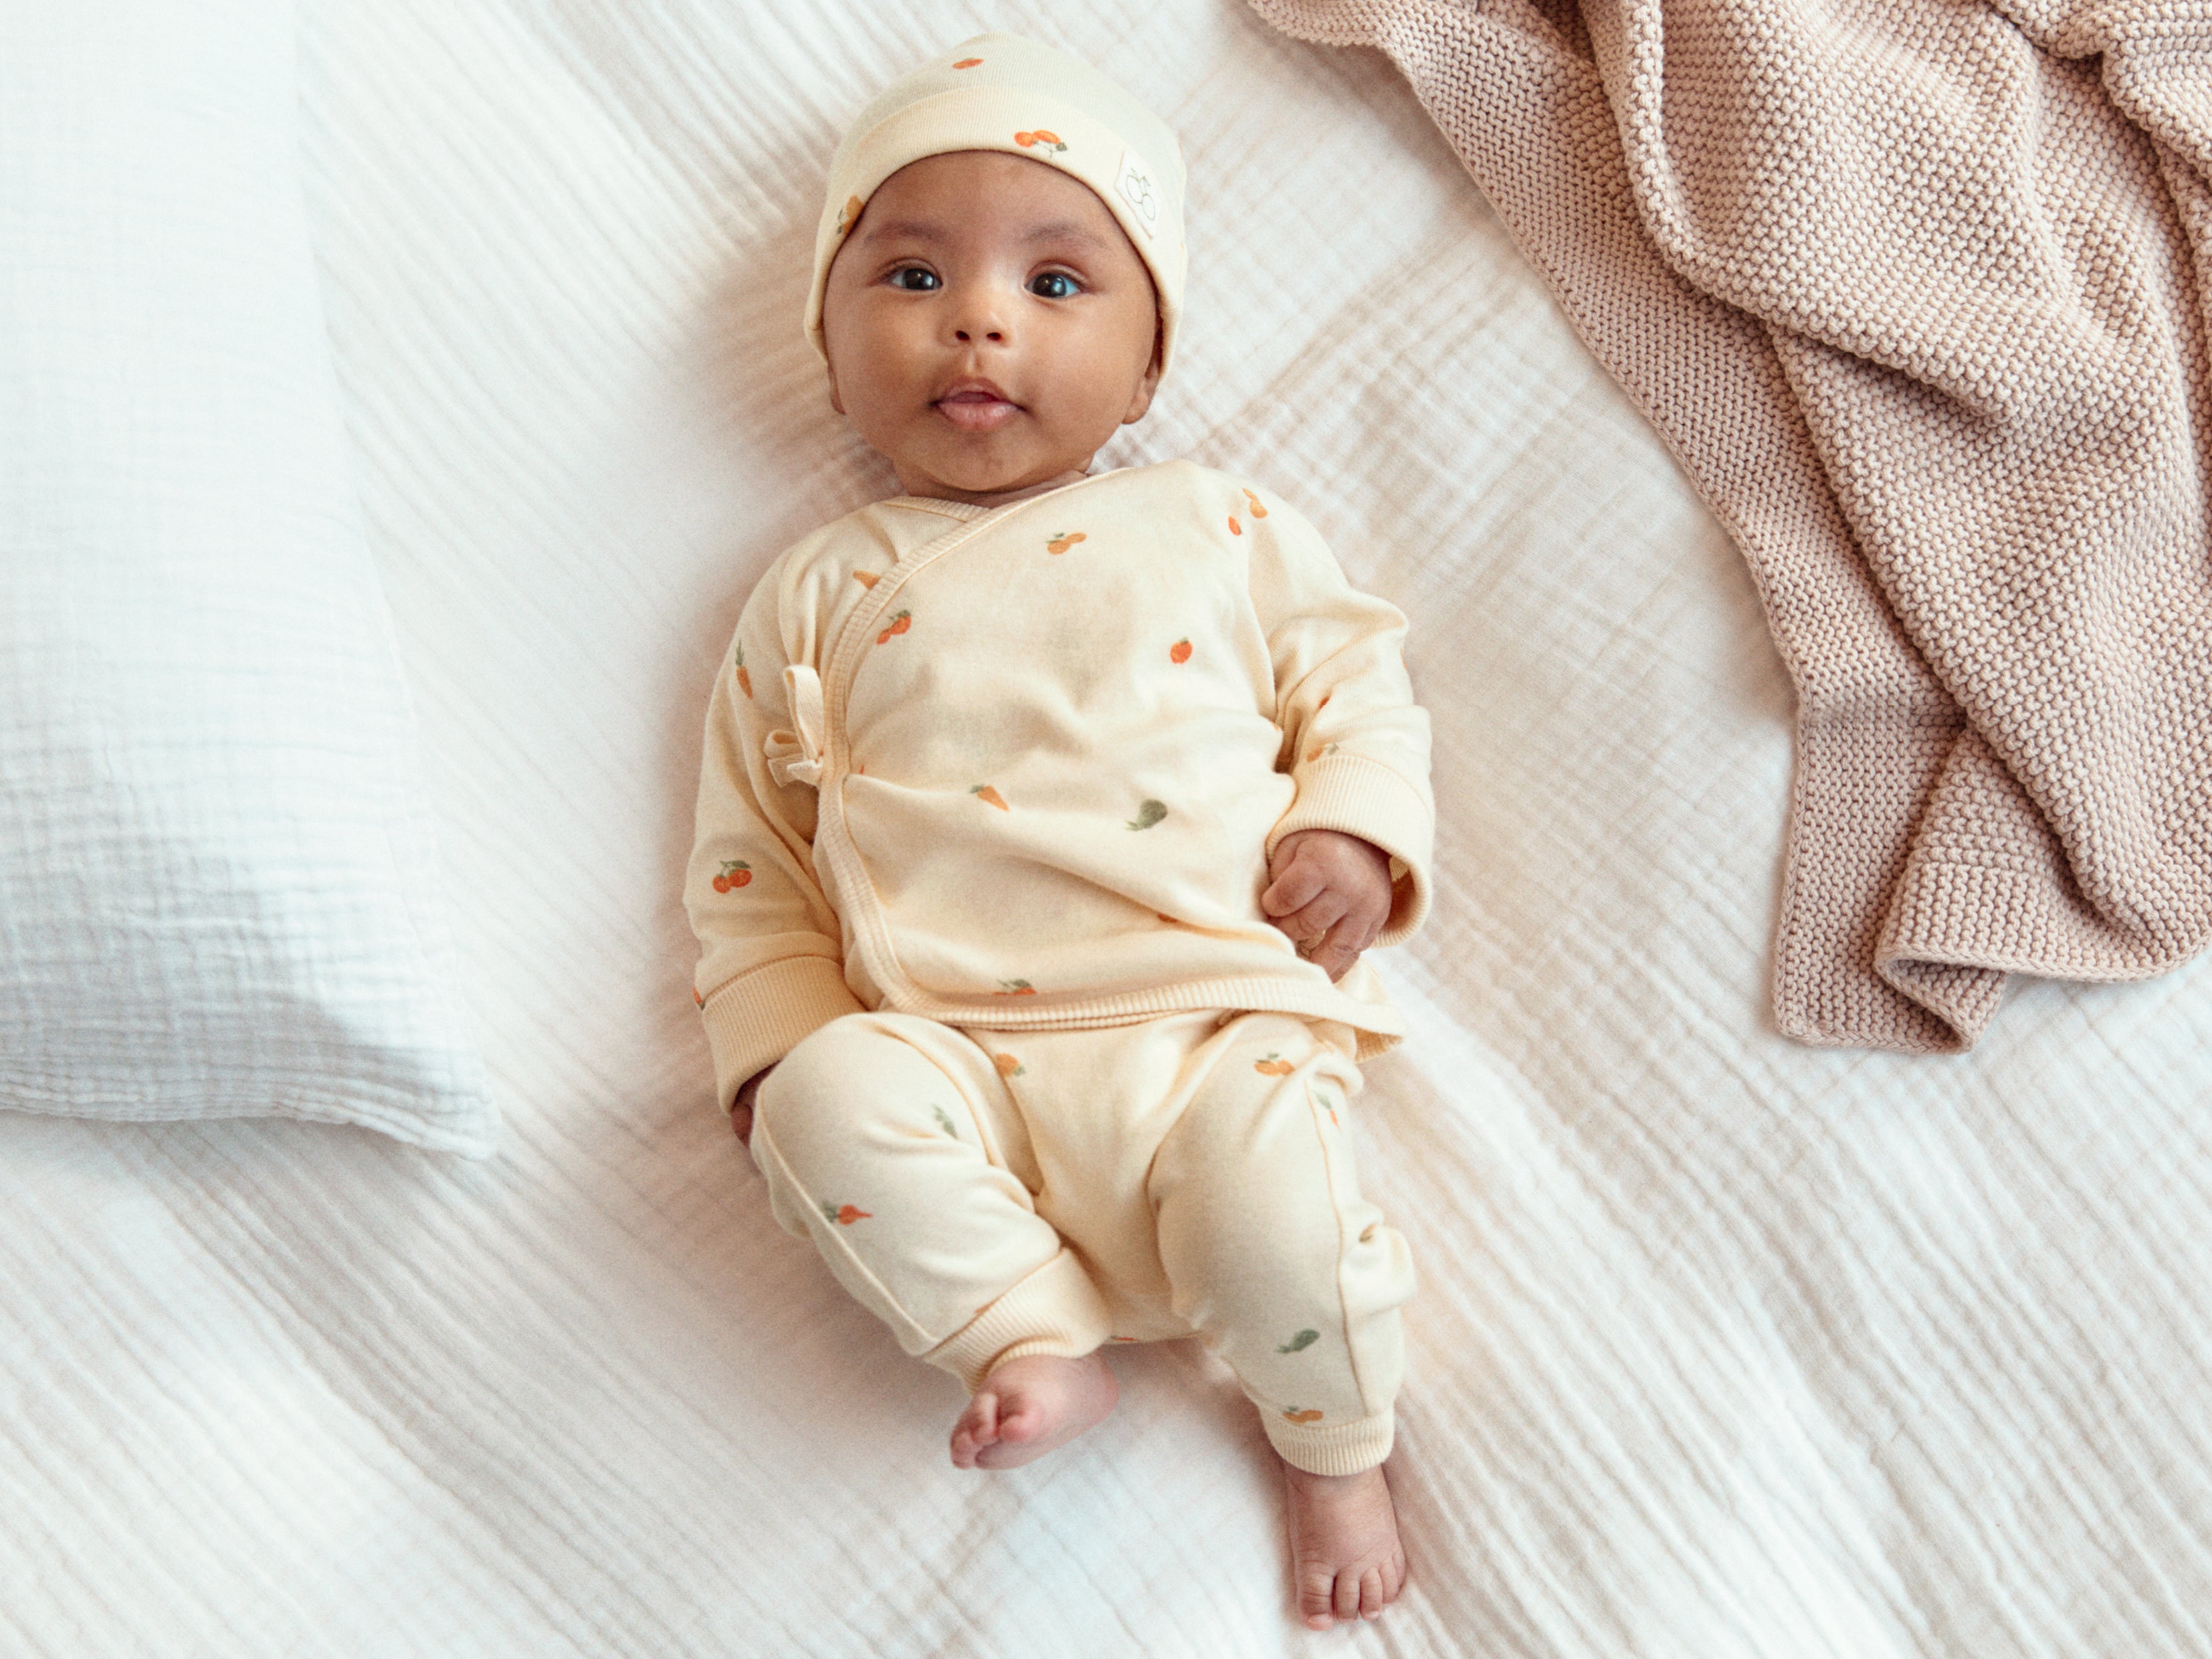 IV. Top Organic Materials Used in Baby Clothing